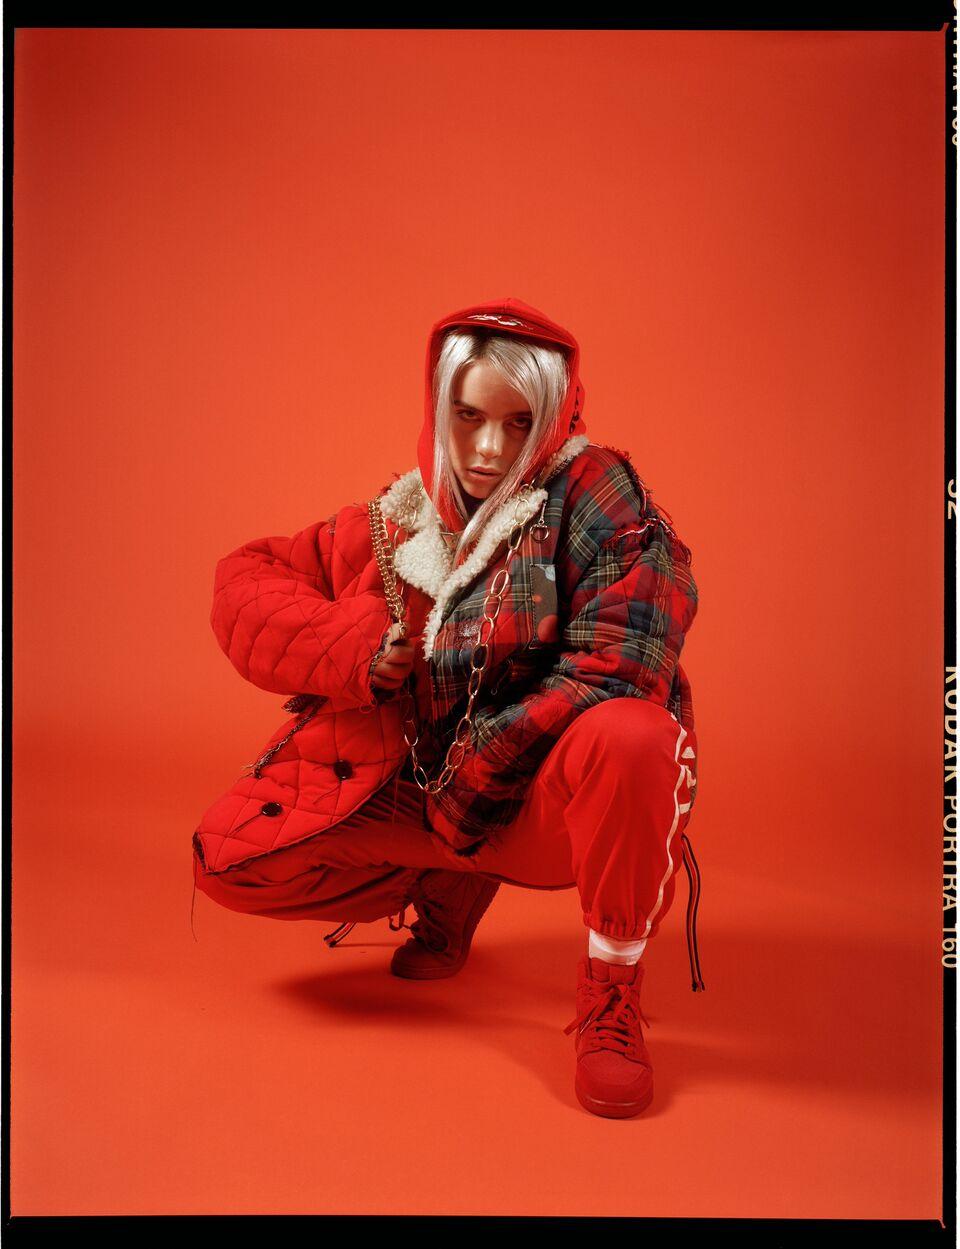 Watch Billie Eilish Set Fire to a Bad Relationship in New Video